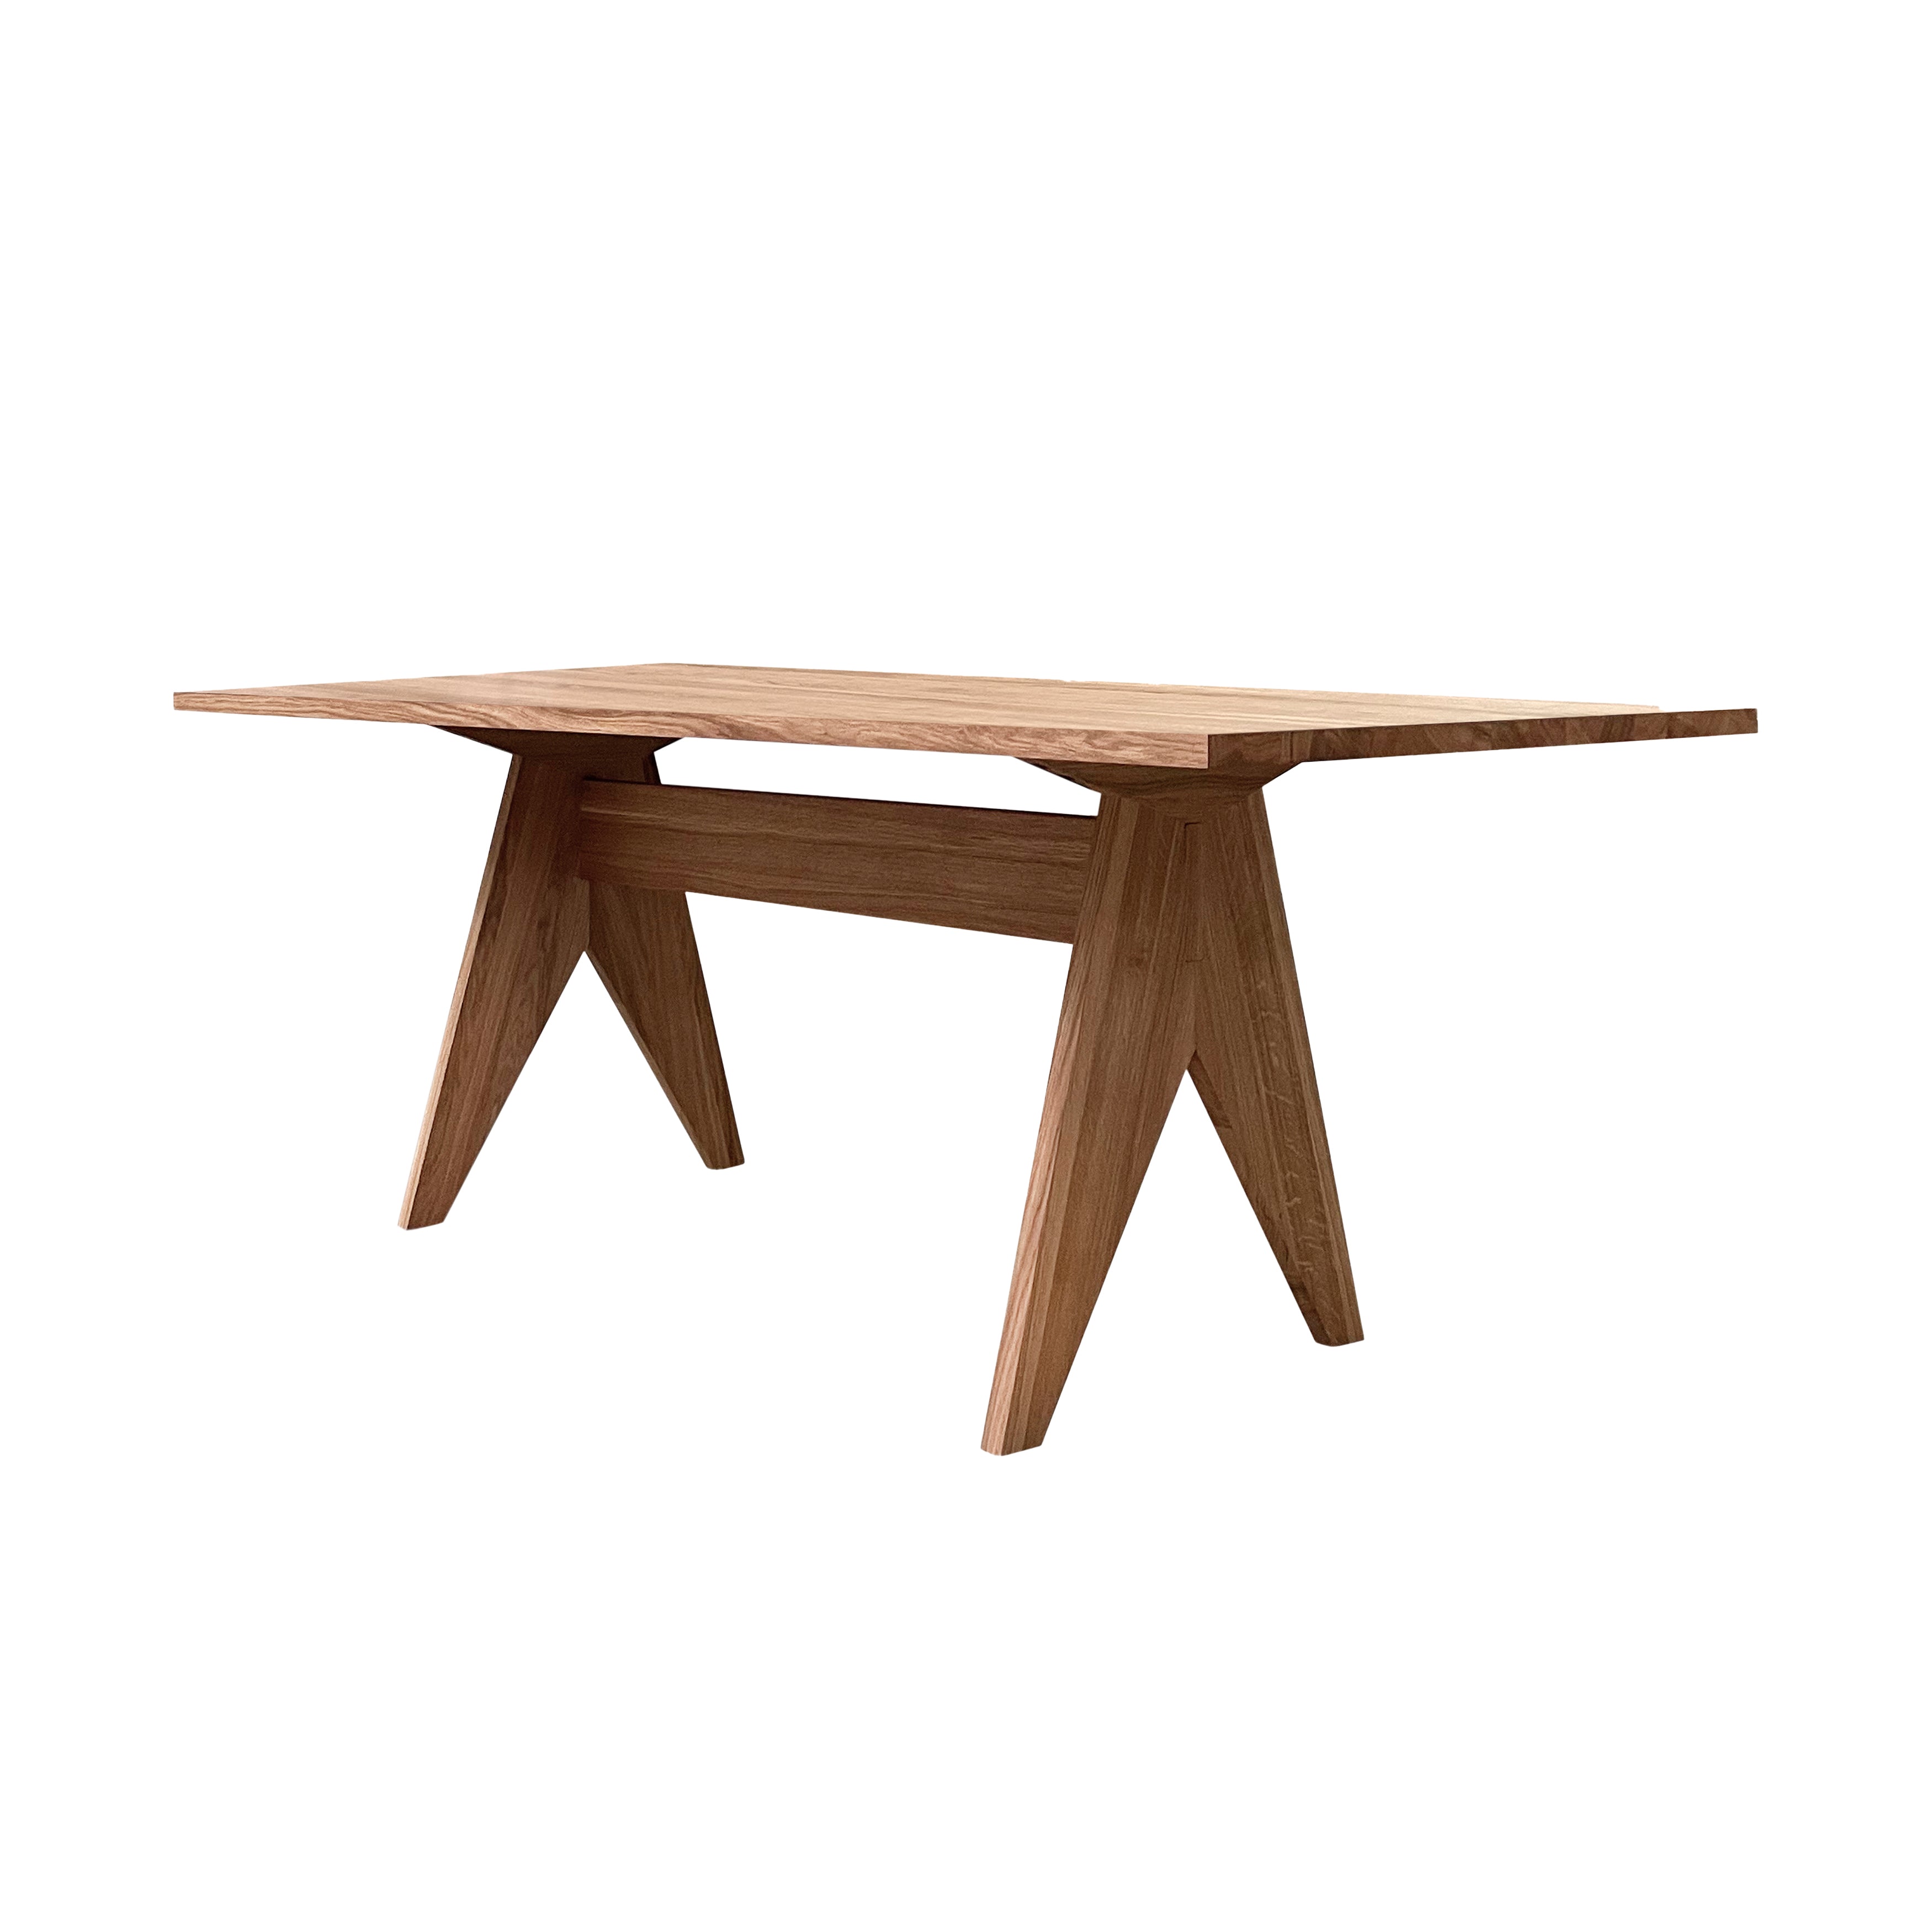 Pose Dining Table: Natural Oak + Small - 78.7